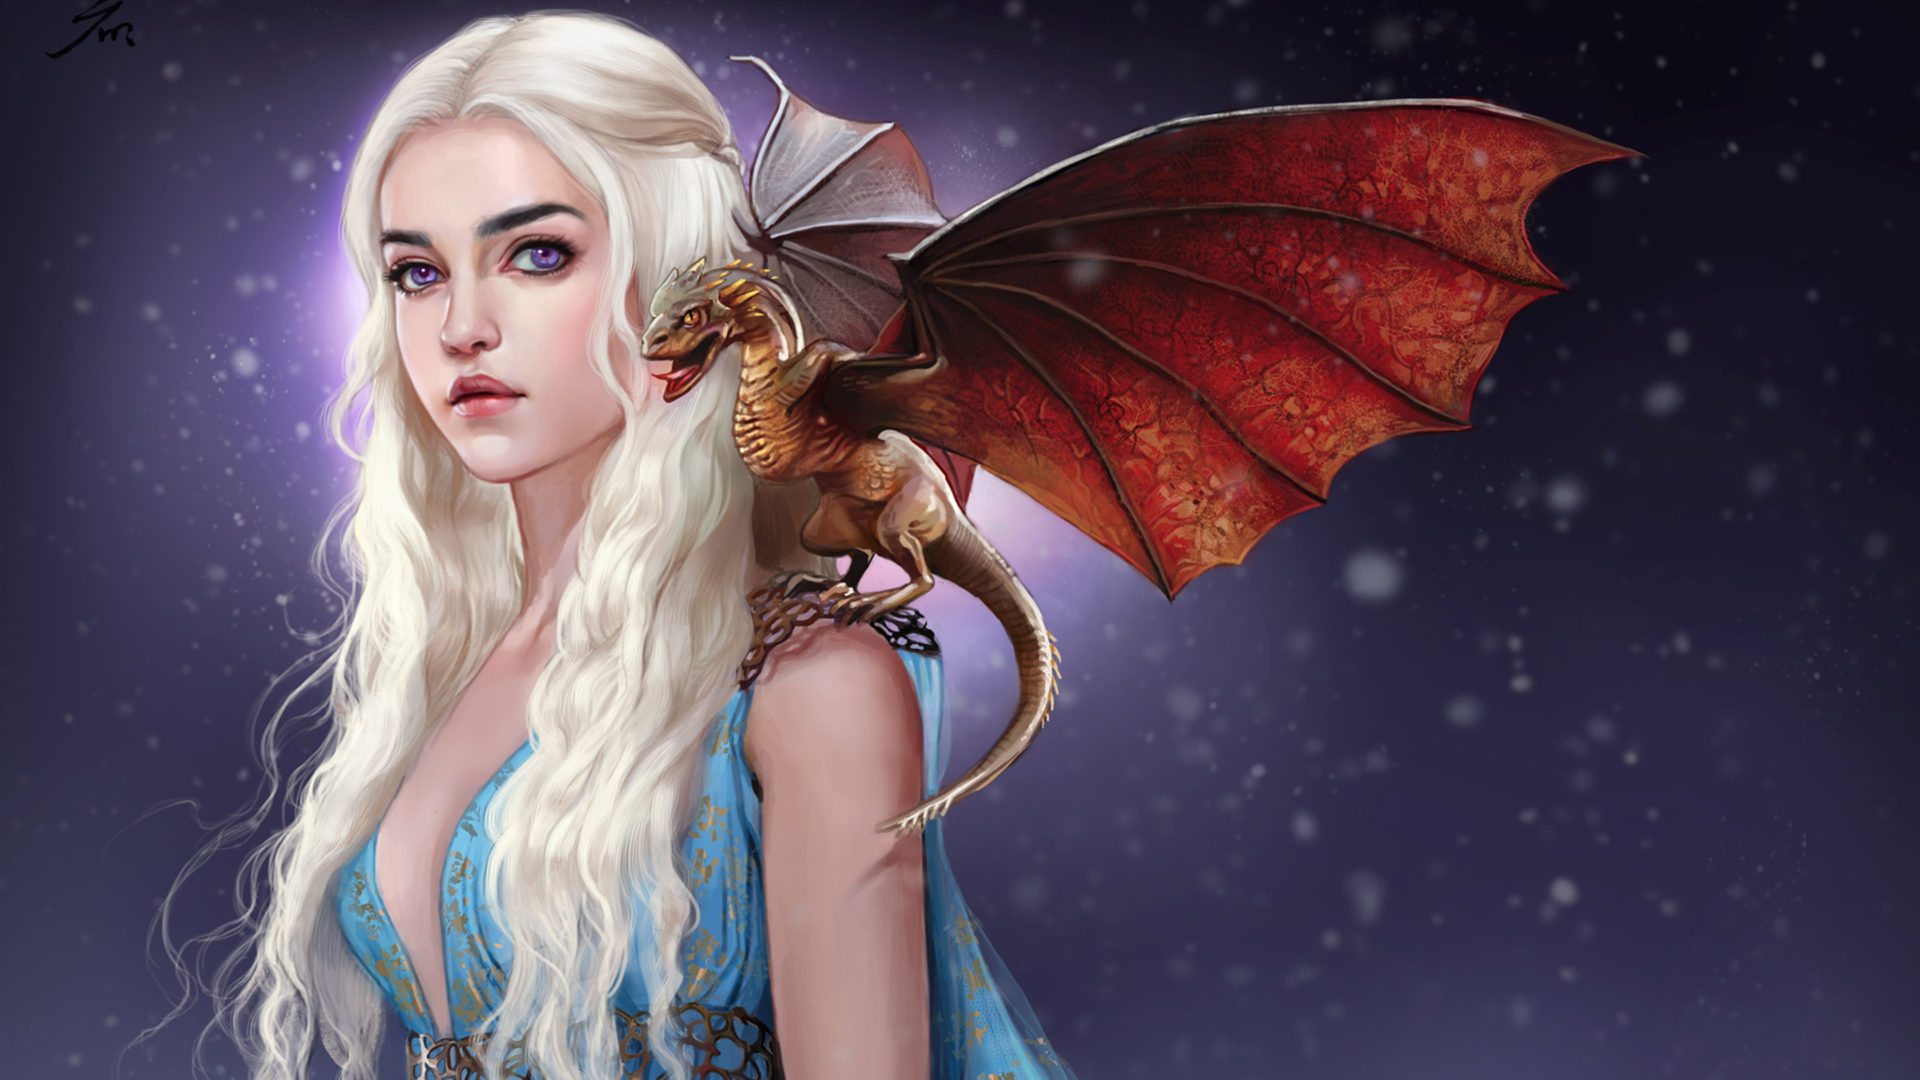 Song Of Ice And Fire Daenerys Art - HD Wallpaper 